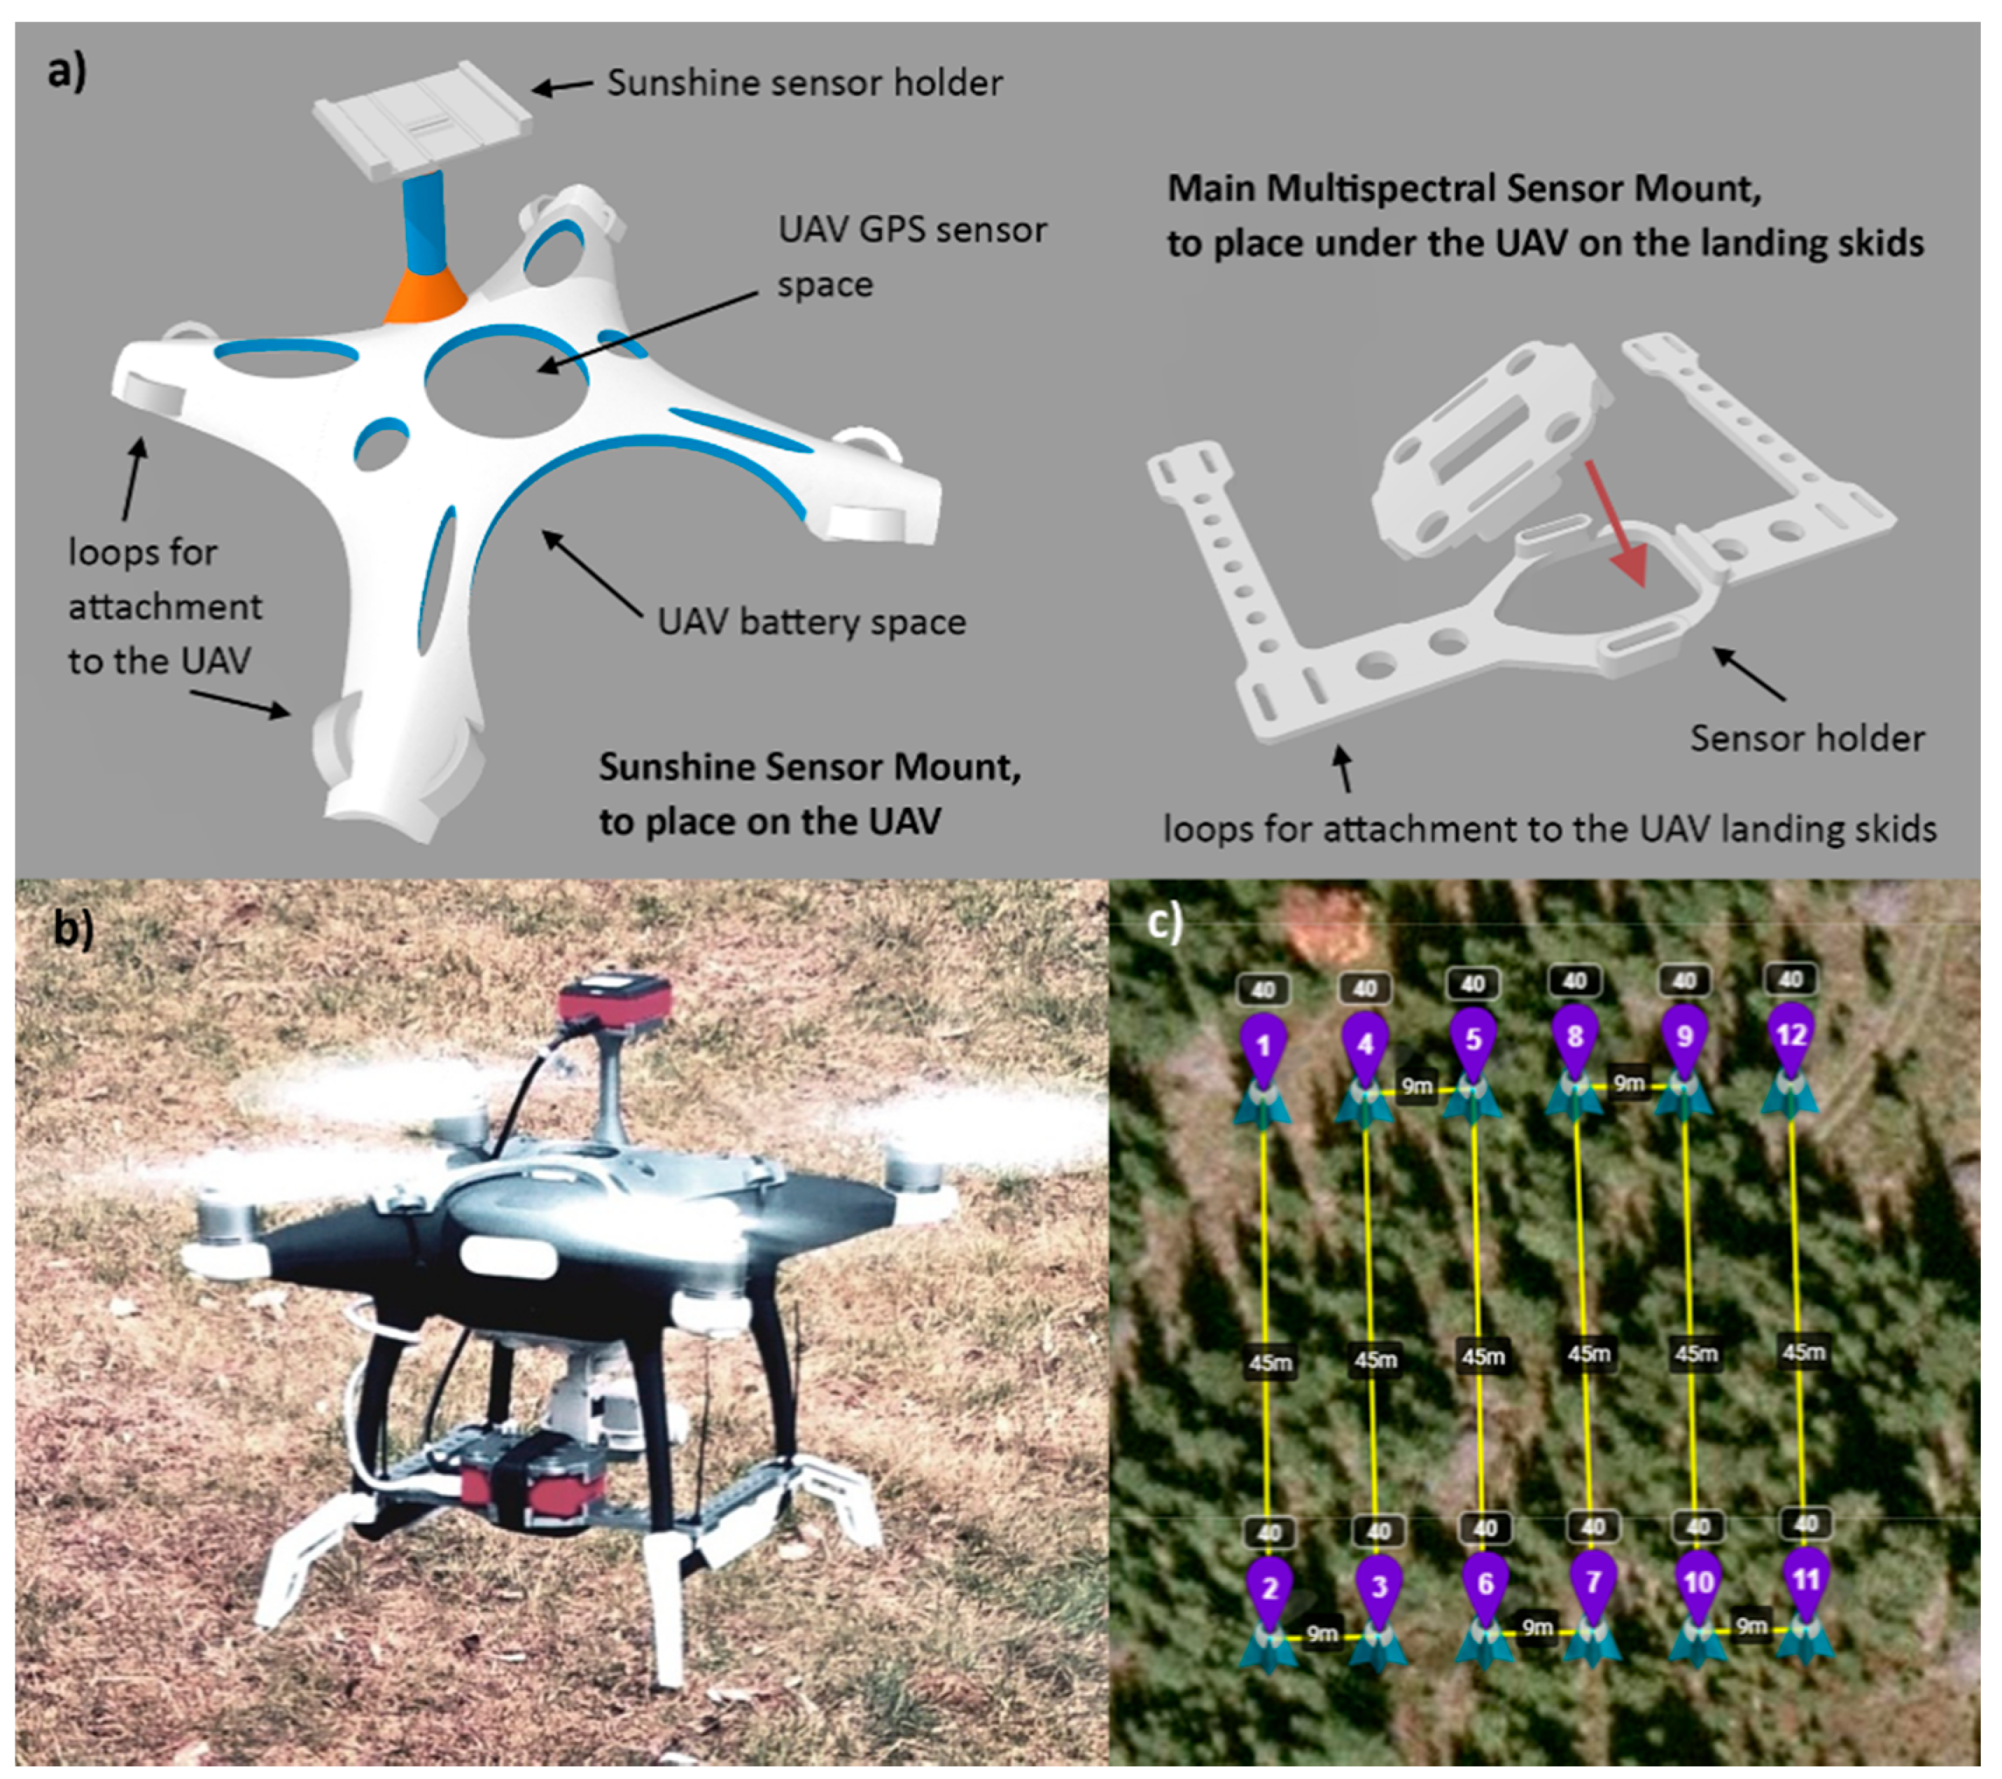 Remote Sensing | Free Full-Text | Canopy Top, Height and Photosynthetic  Pigment Estimation Using Parrot Sequoia Multispectral Imagery and the  Unmanned Aerial Vehicle (UAV)